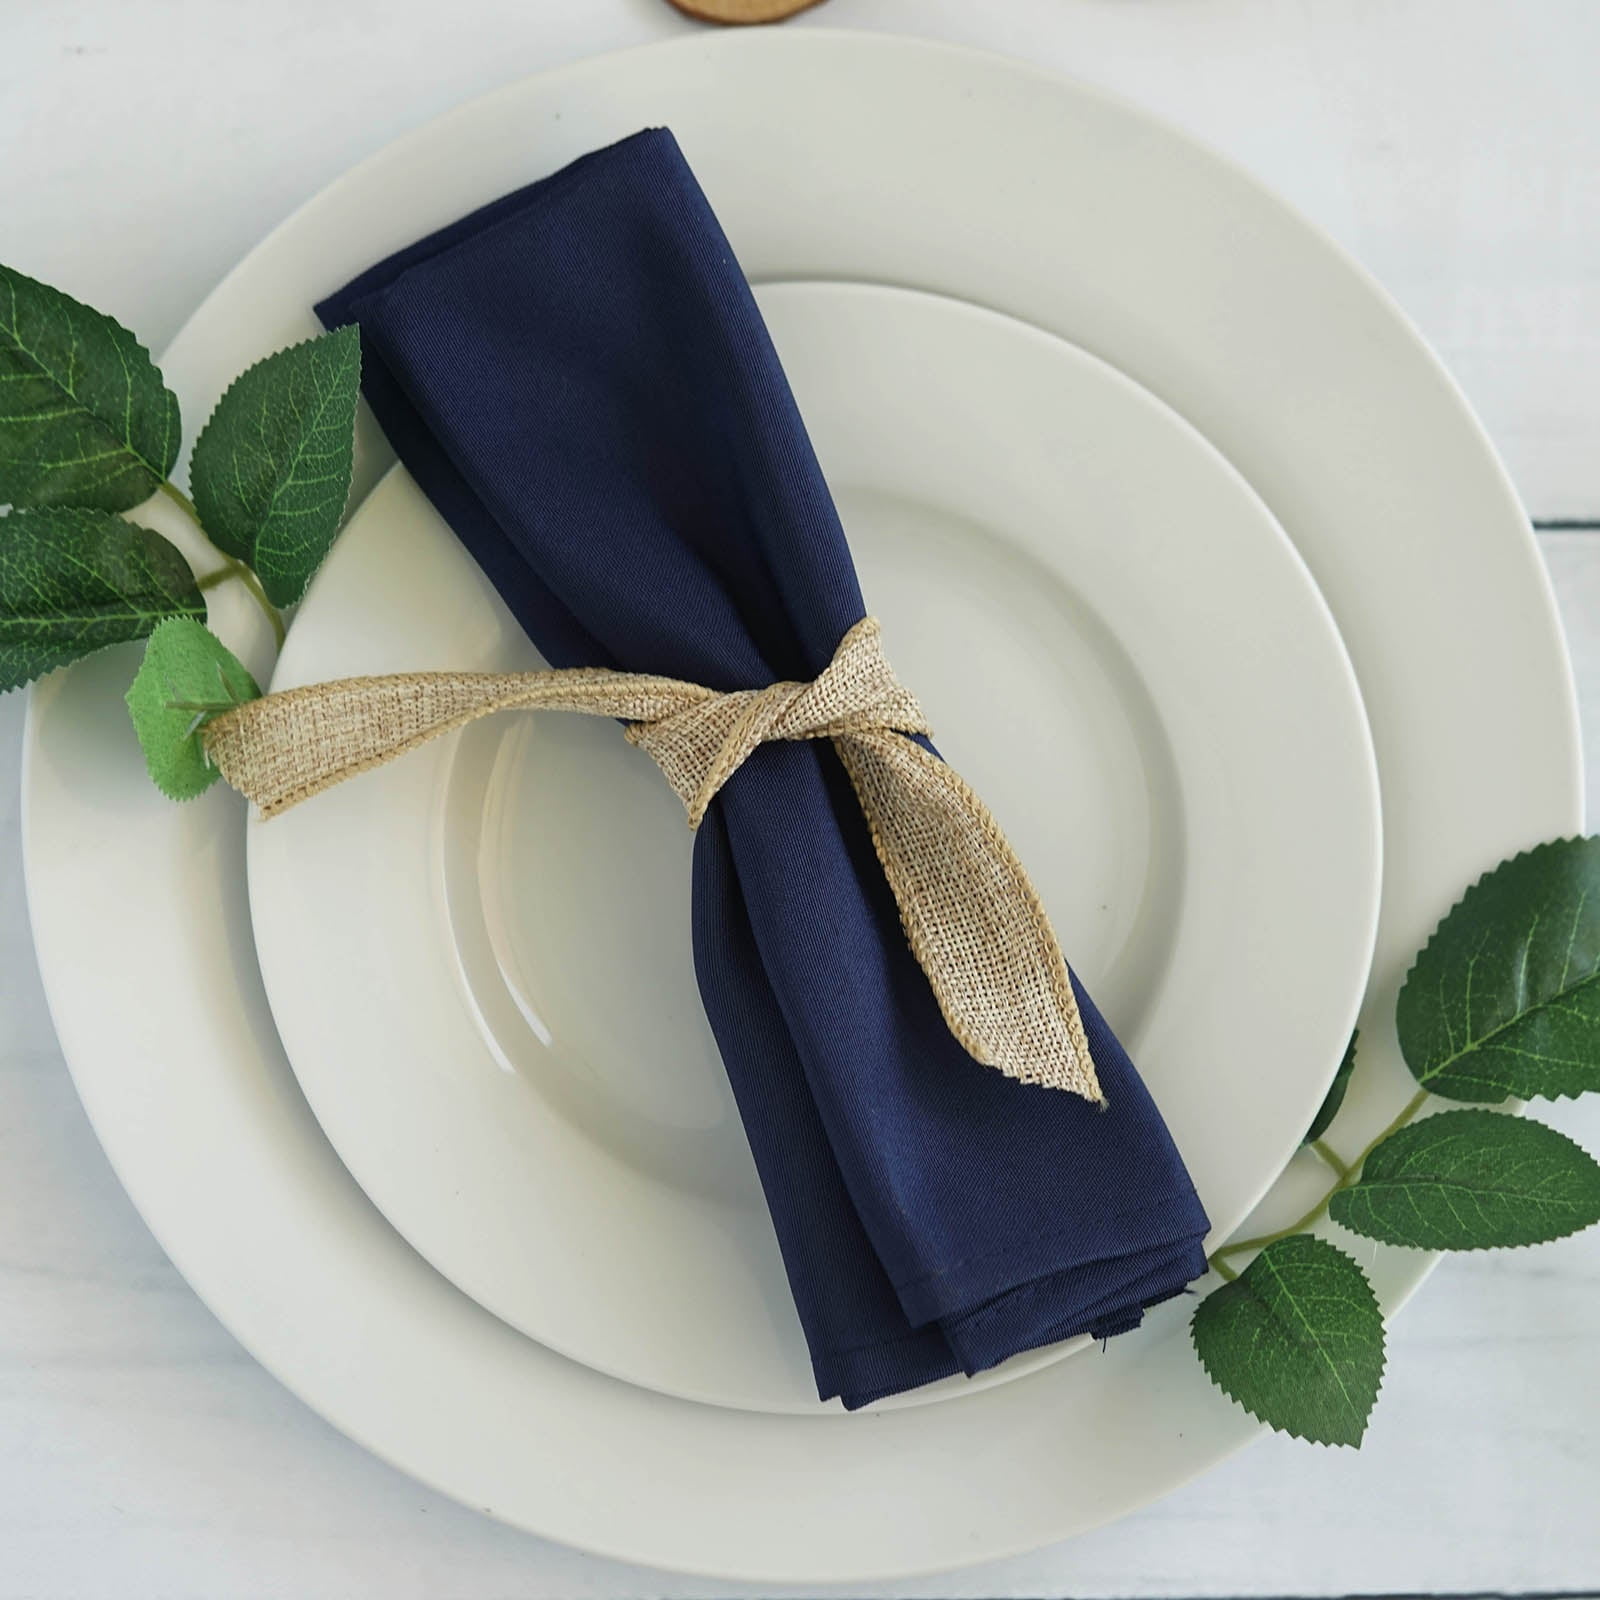 Dinning Banquet Events Party Wedding Trimming Shop 20 Inch Cotton Polyester Royal Blue Table Napkin for Home Hemmed Edges Lightweight & Machine Washable Hotel 1 piece 